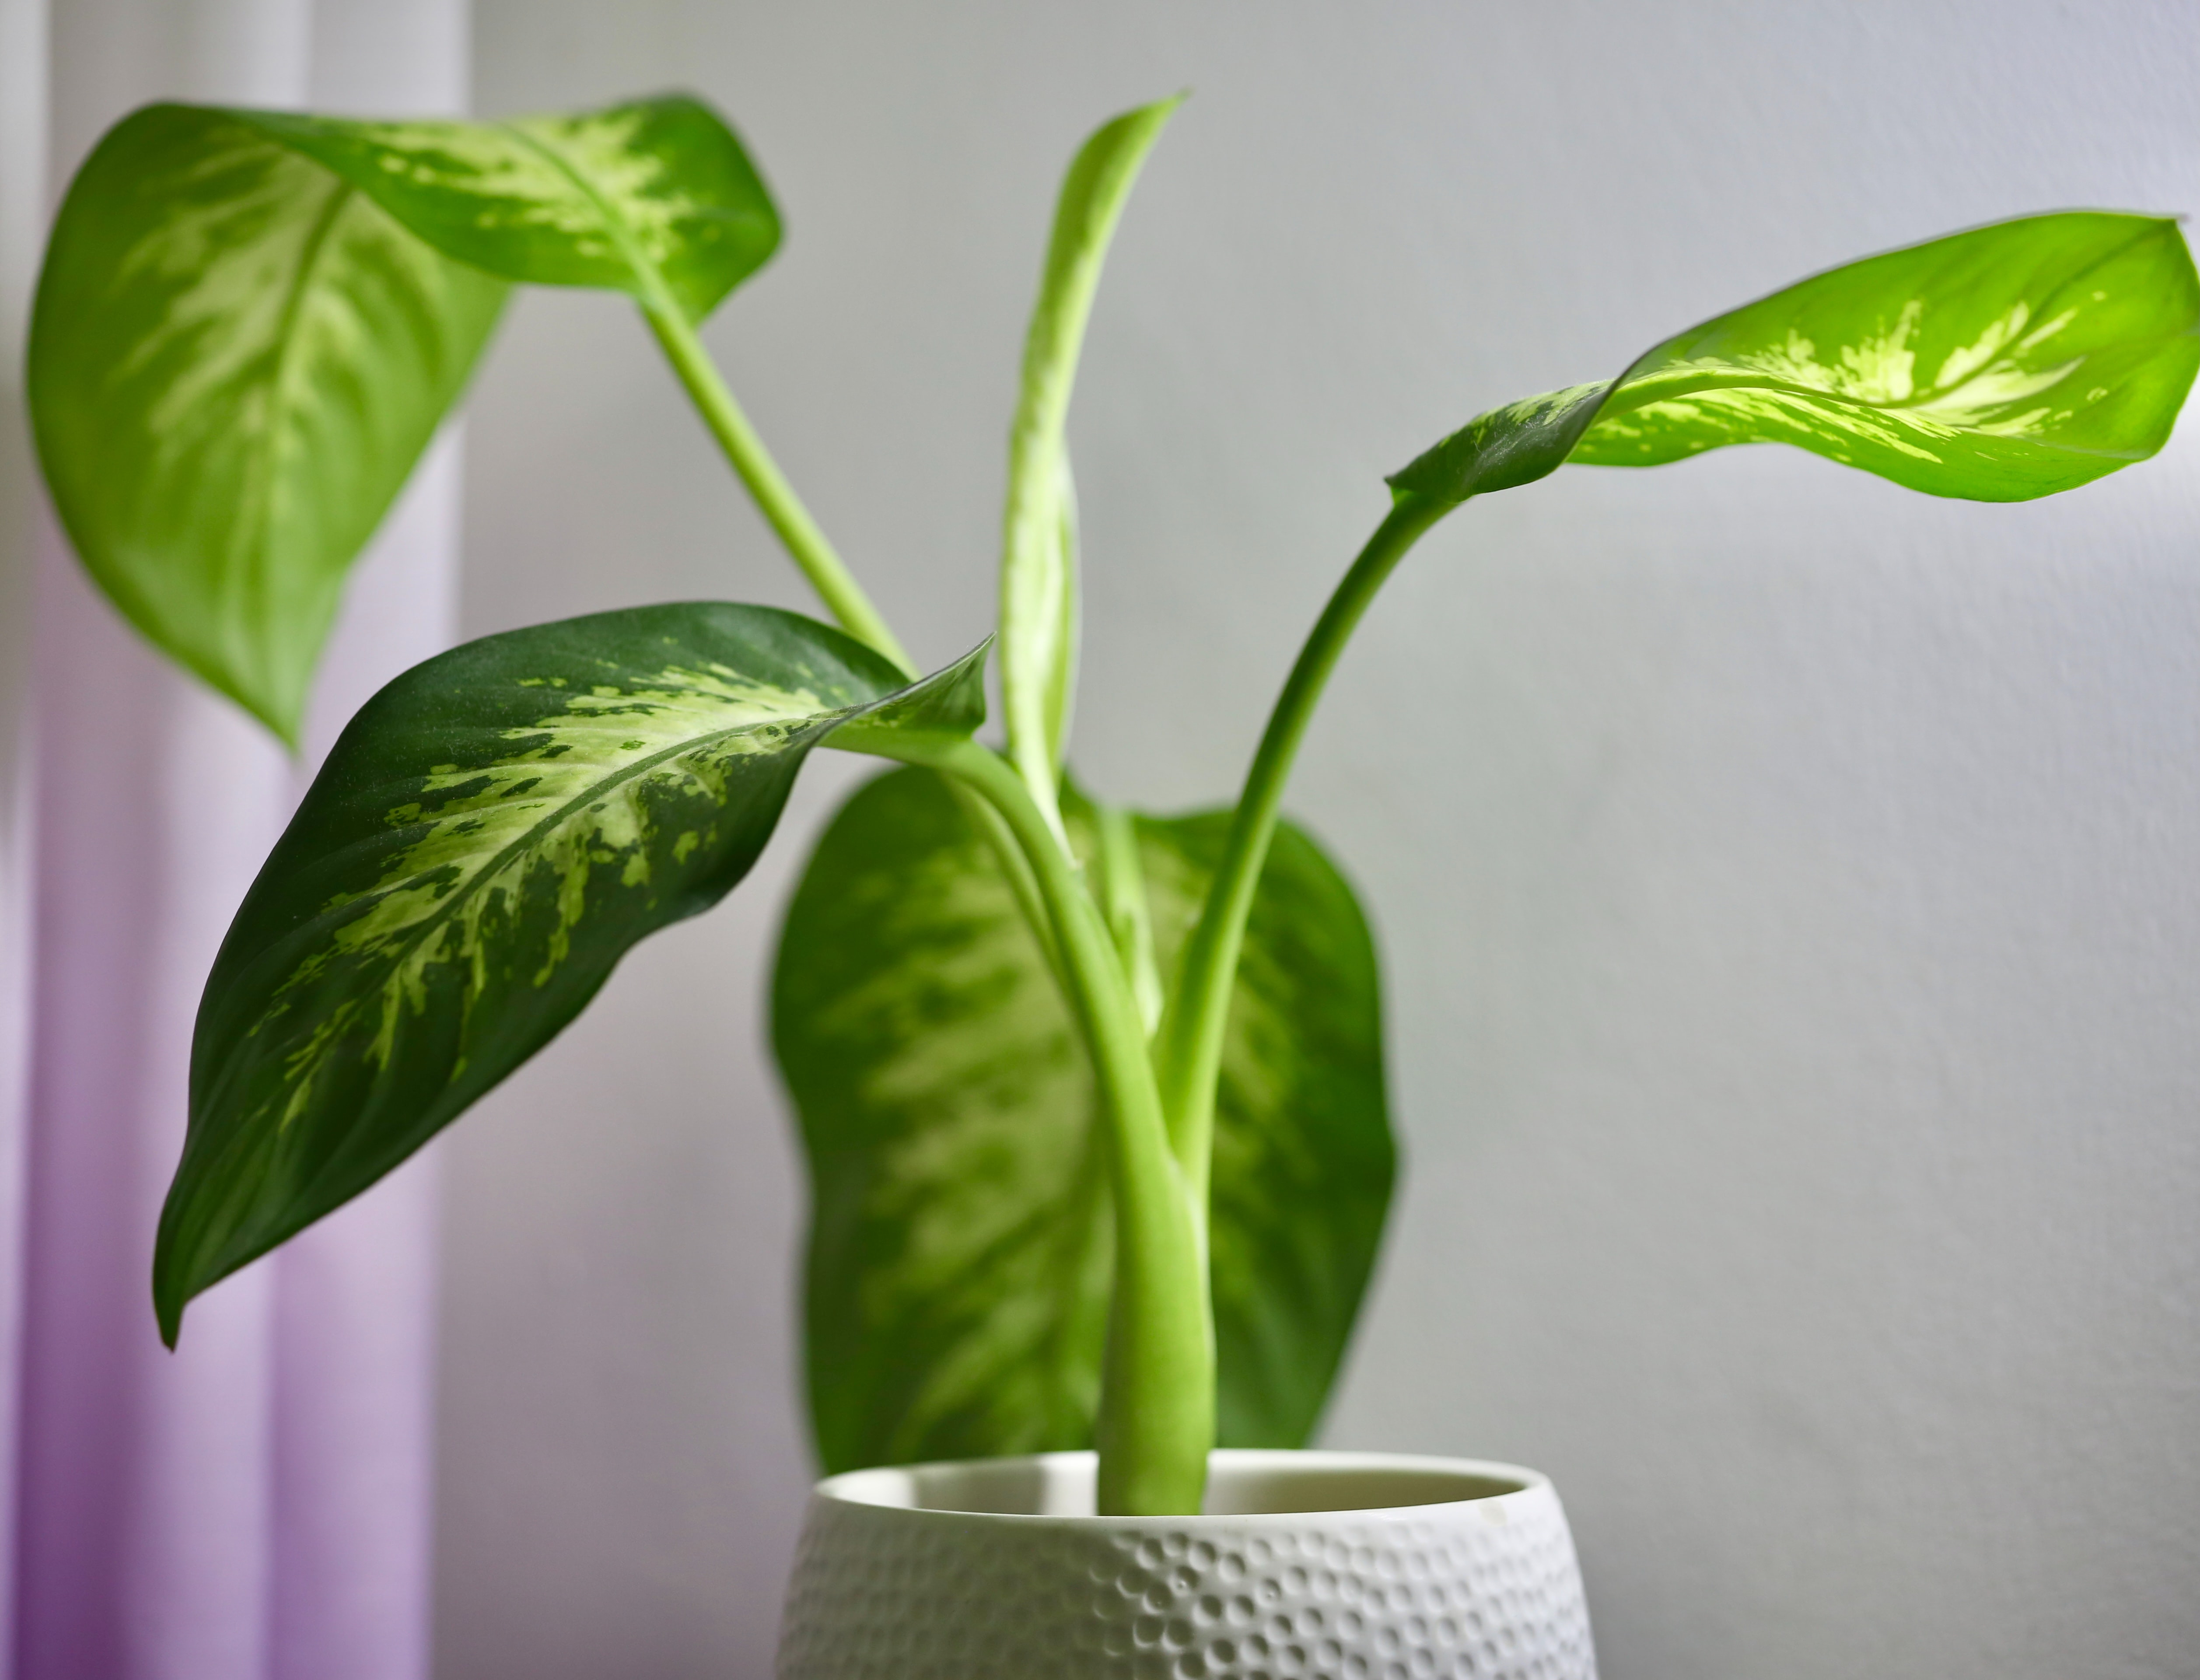 The best way to repot your Dieffenbachia